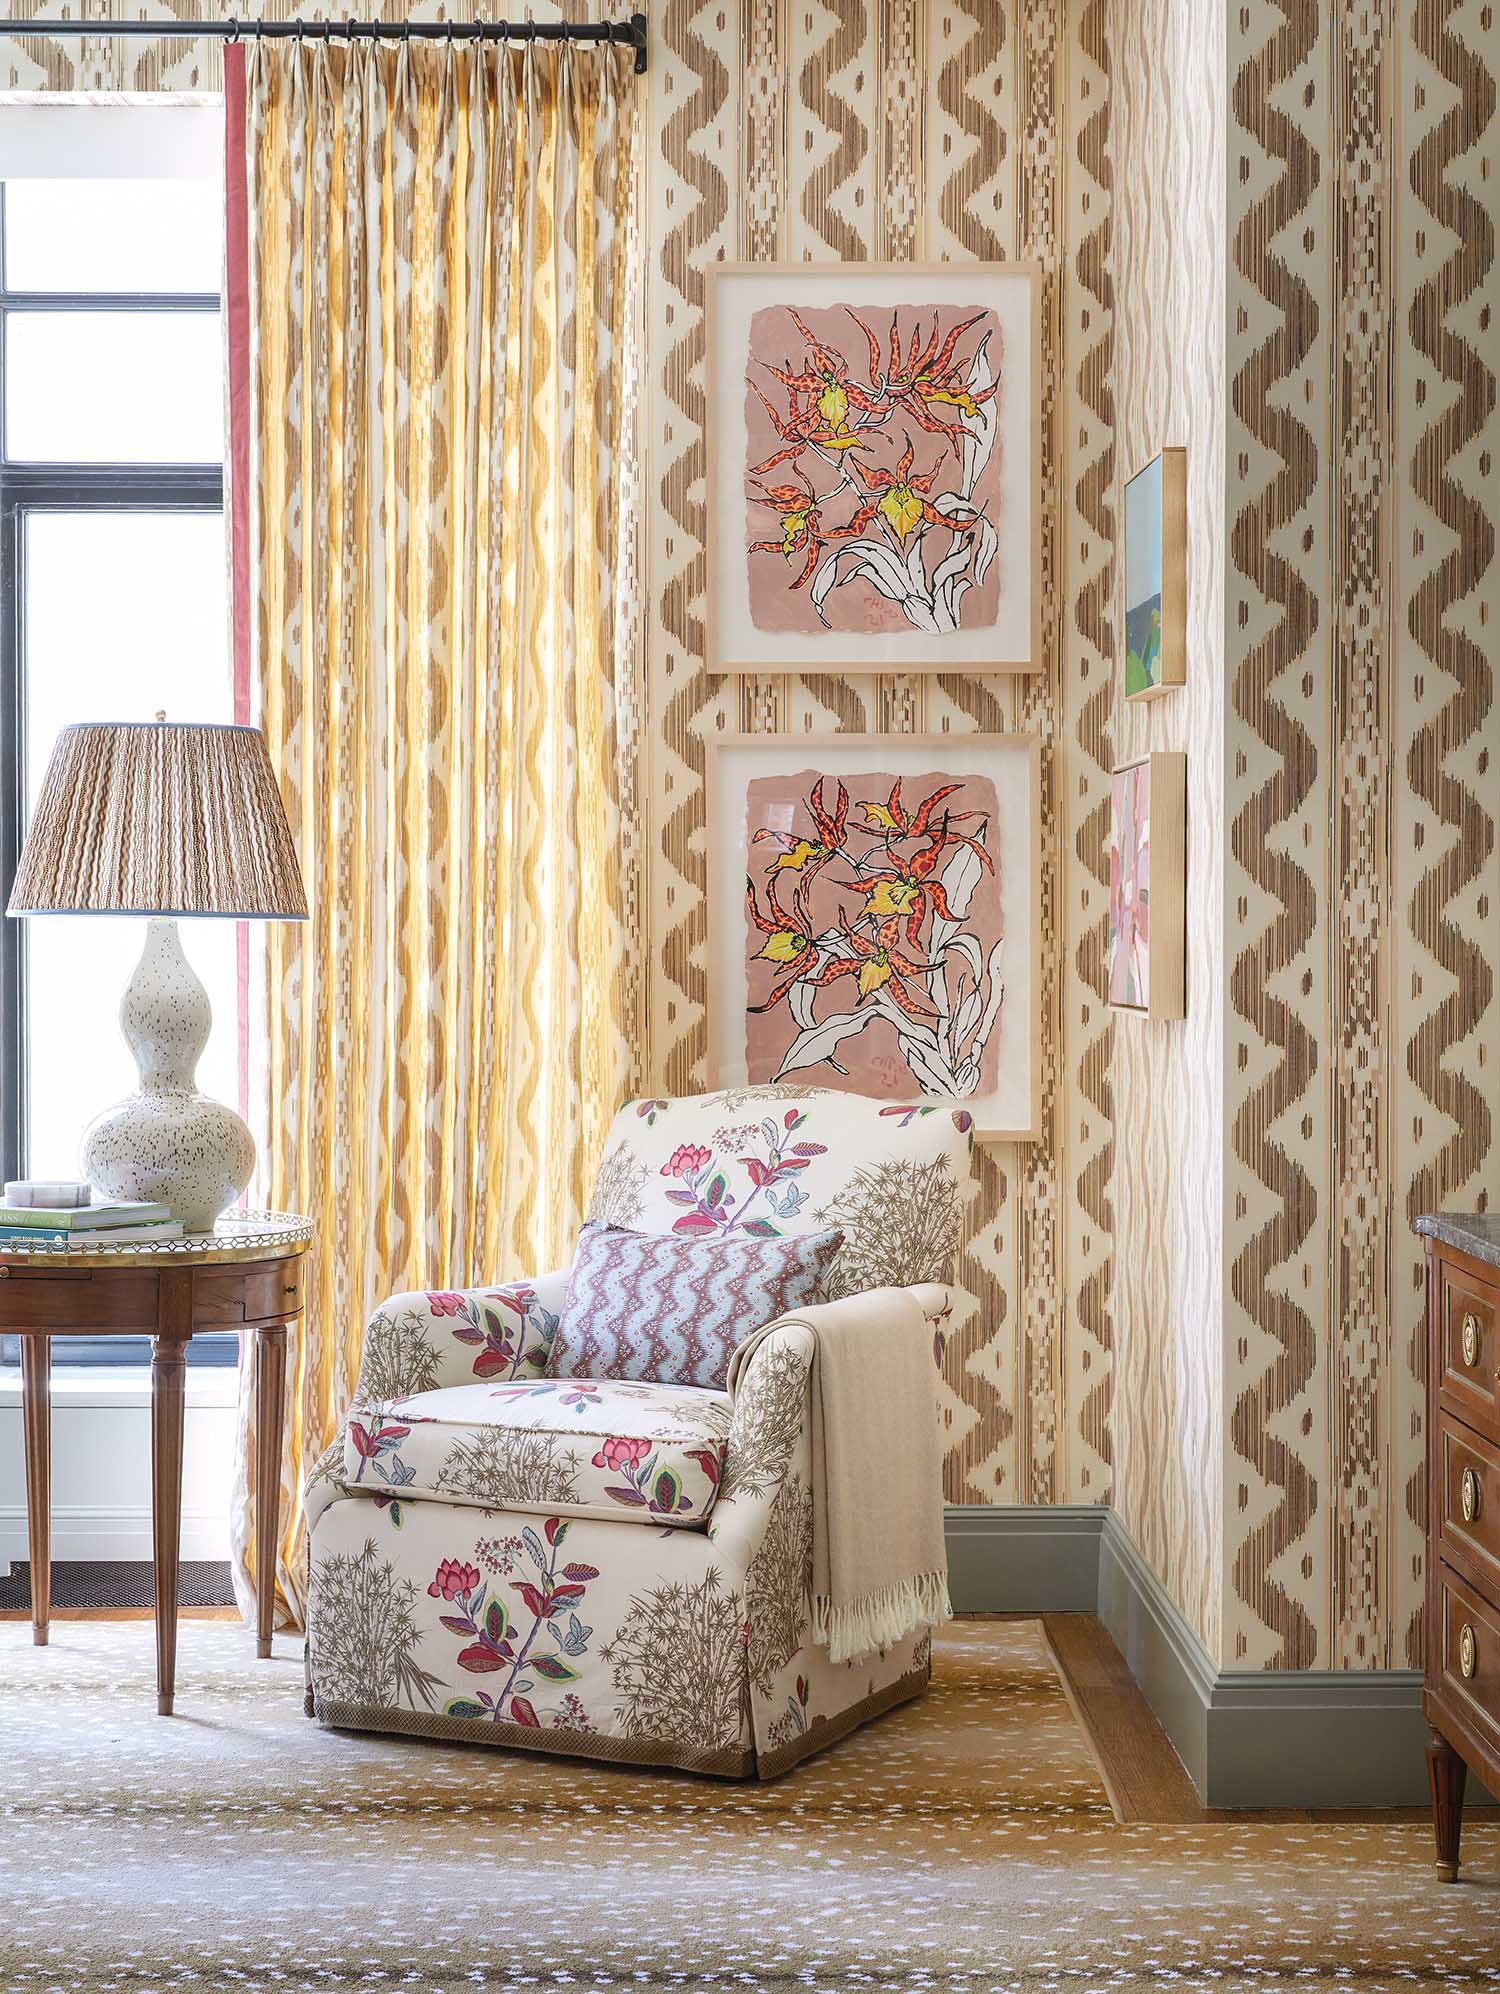 A floral print chair sits in the corner of a striped wallpaper room.